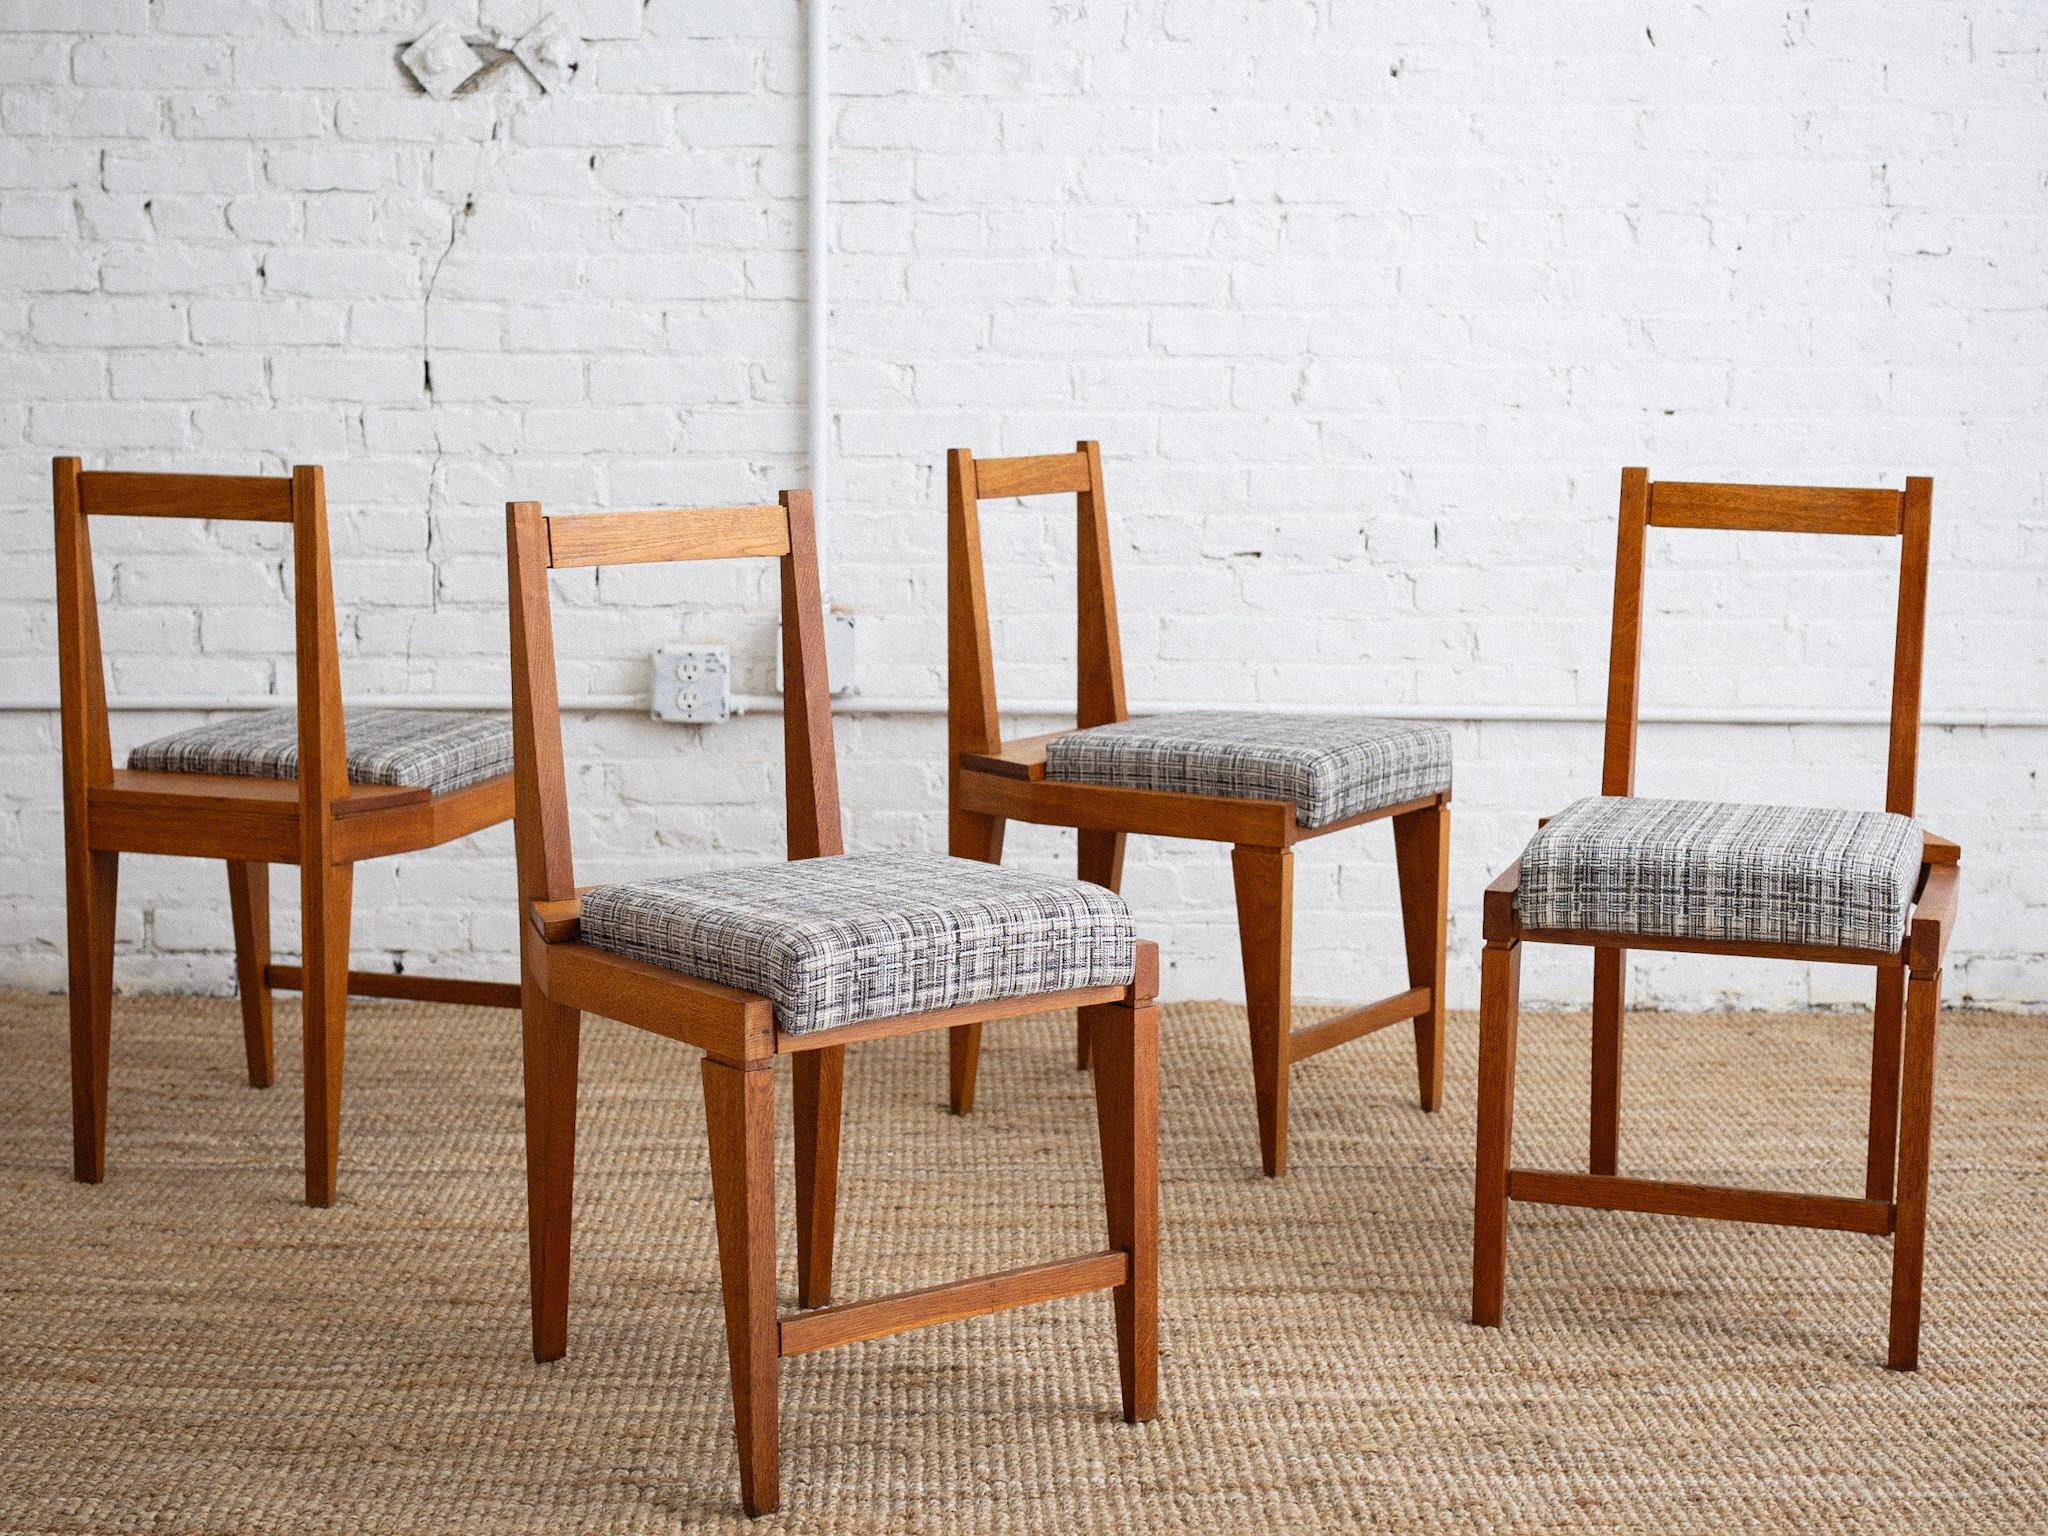 A set of 4 mid century Italian dining chairs. Solid wood frames with a minimalist geometric silhouette. Newer upholstery in a black white and gray woven cotton. Sourced in Northern Italy. 